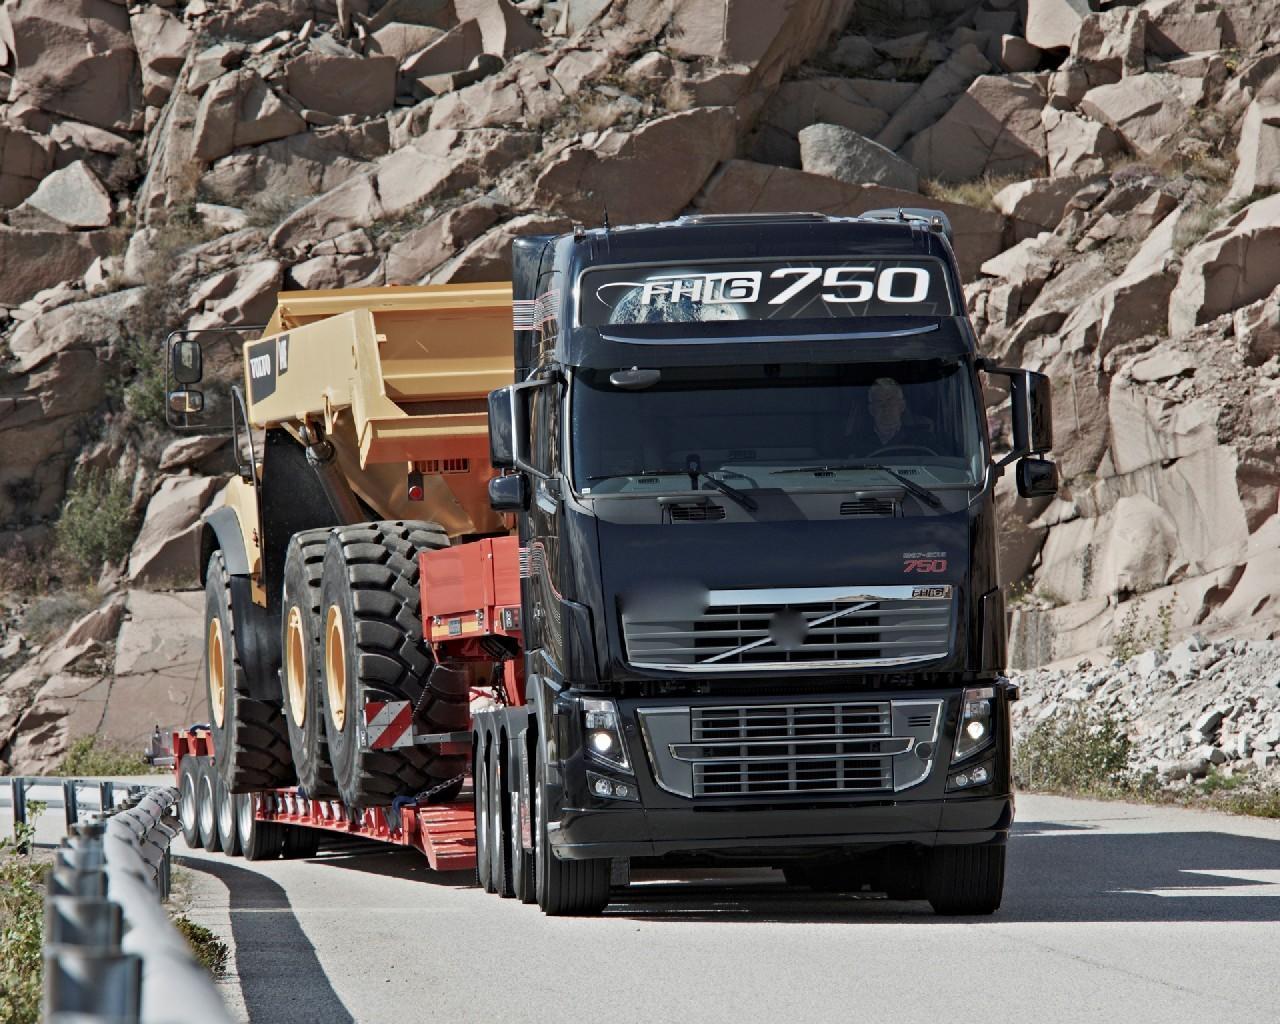 Volvo Fh16 750 Wallpapers